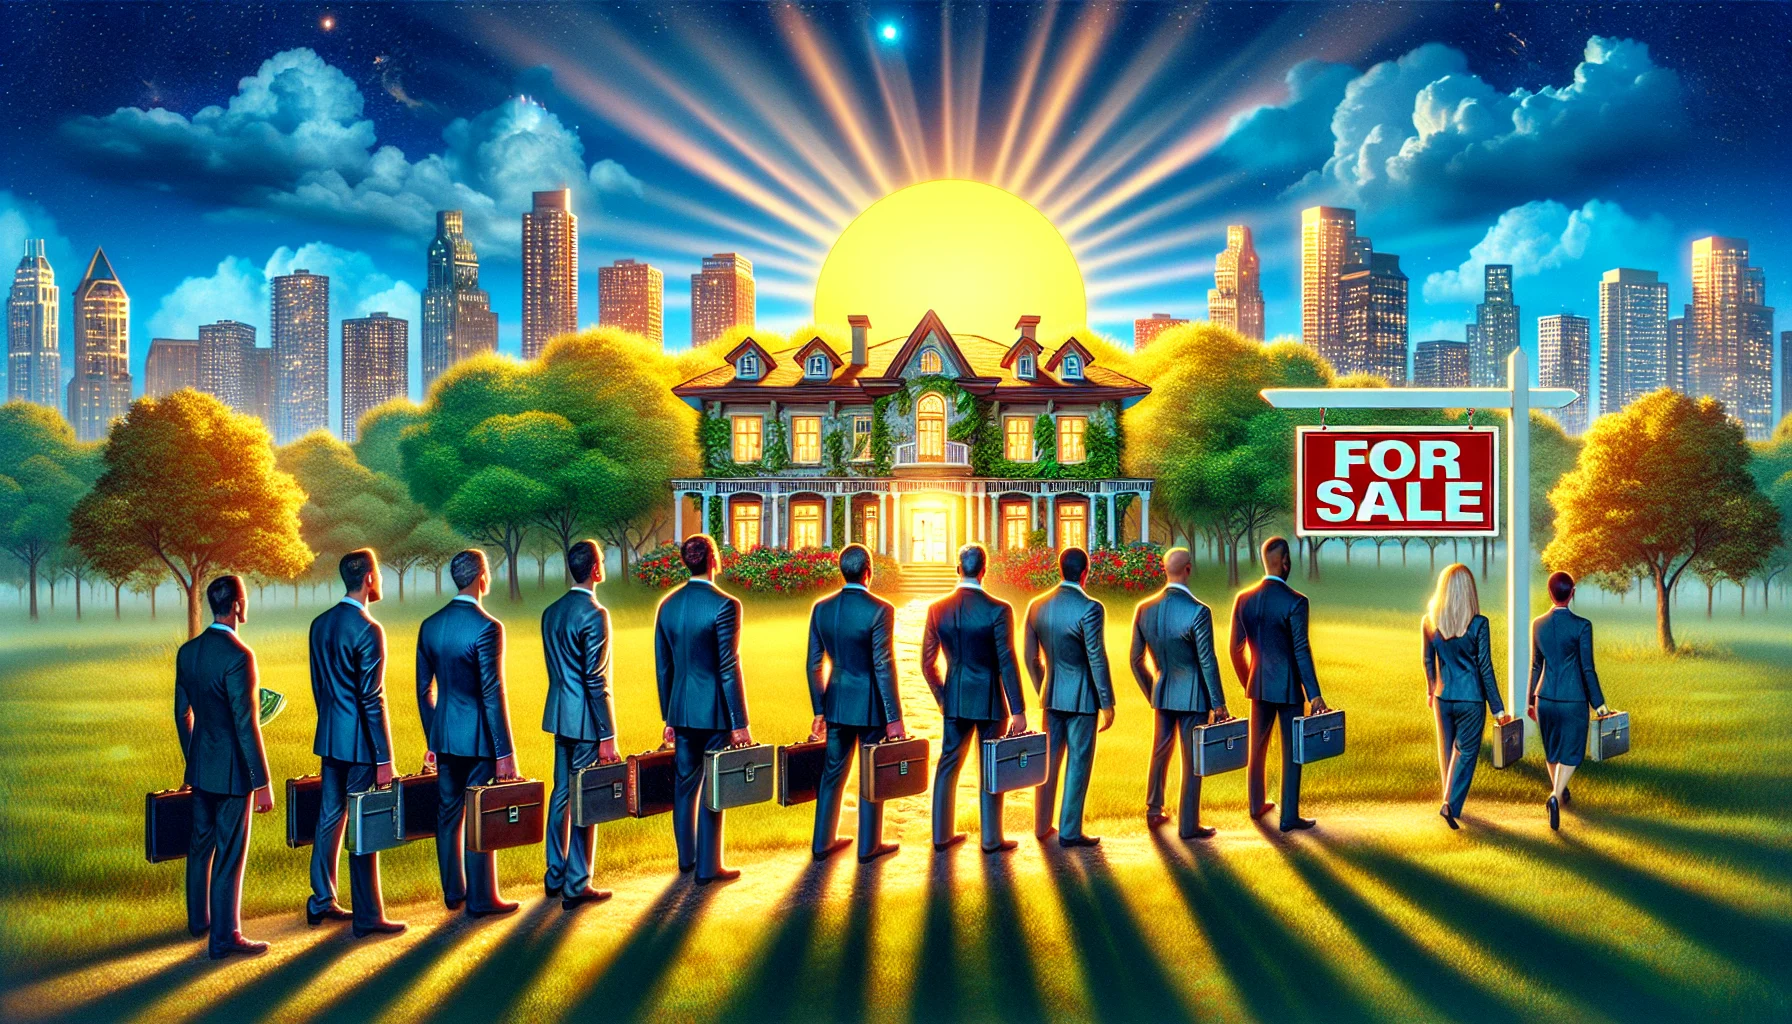 Generate a humorous image represented in a surrealistic way that showcases the most ideal scenario in the world of real-estate. Include a prominently displayed sign marked 'For Sale' with a bright sun overhead shining on a pristine mansion nestled between vibrant green trees. A trail of interested potential buyers of different descents such as Caucasian, Hispanic, and Black both men and women are lined up, each holding a briefcase of cash. Illuminated against the backdrop is a city skyline with skyscrapers that are gleaming in the light of the setting sun.